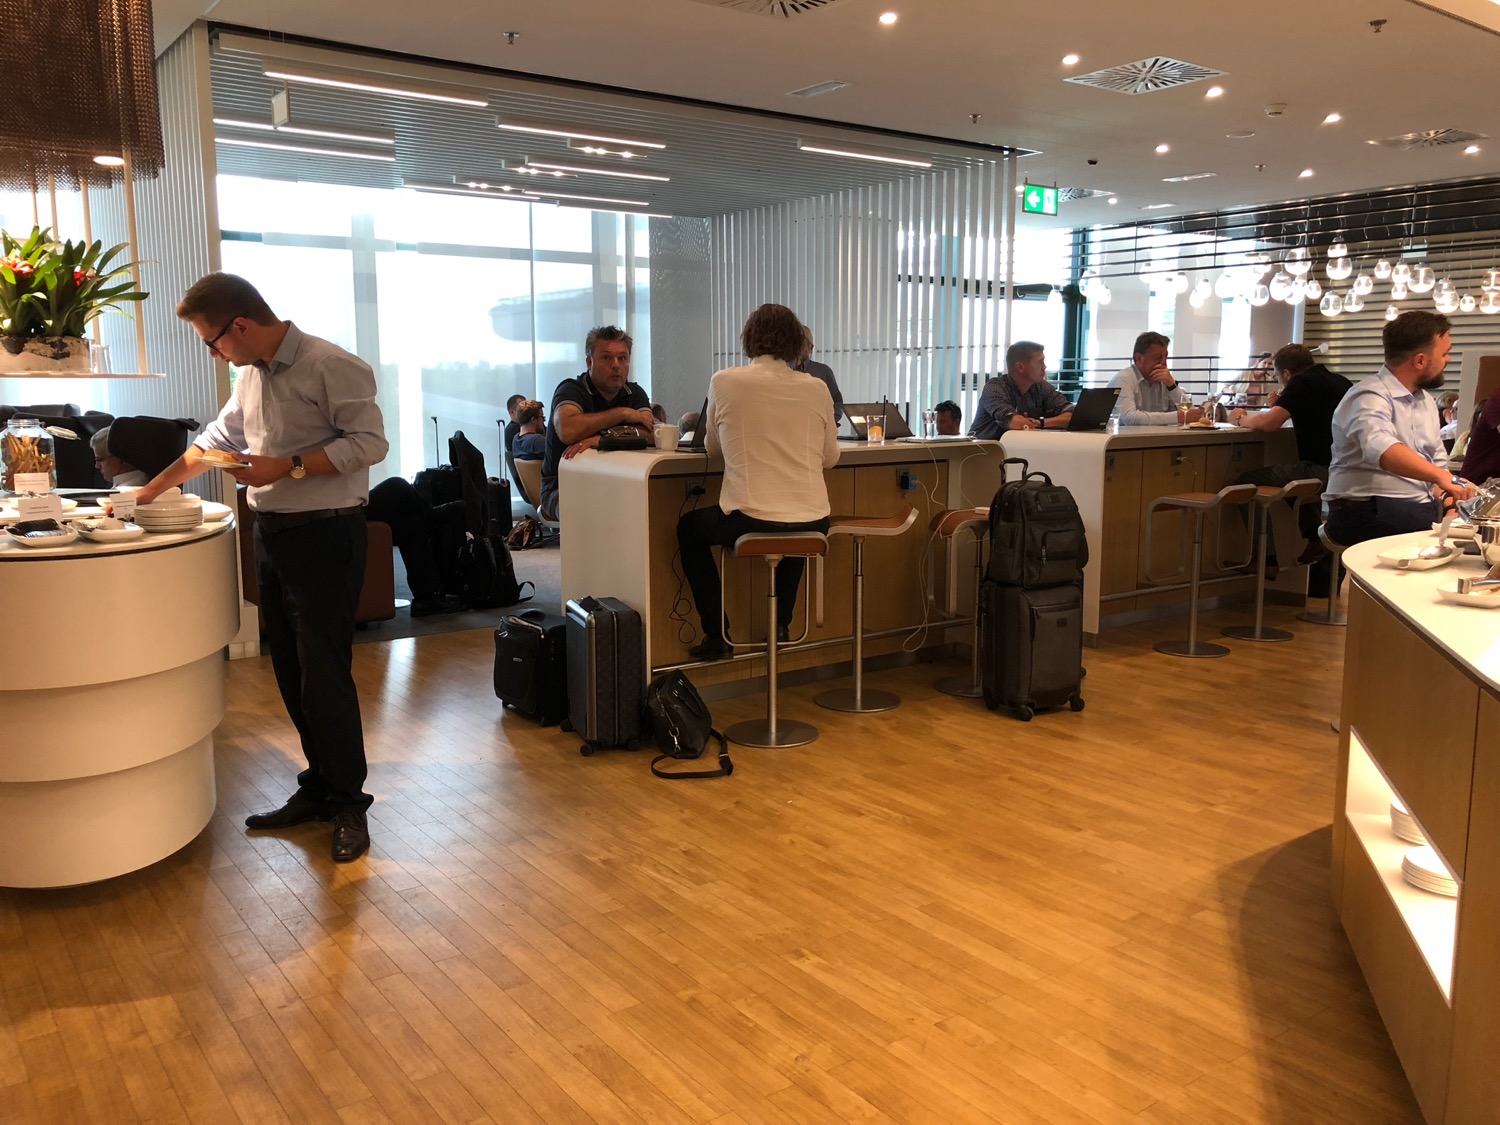 people sitting at a counter in a room with luggage